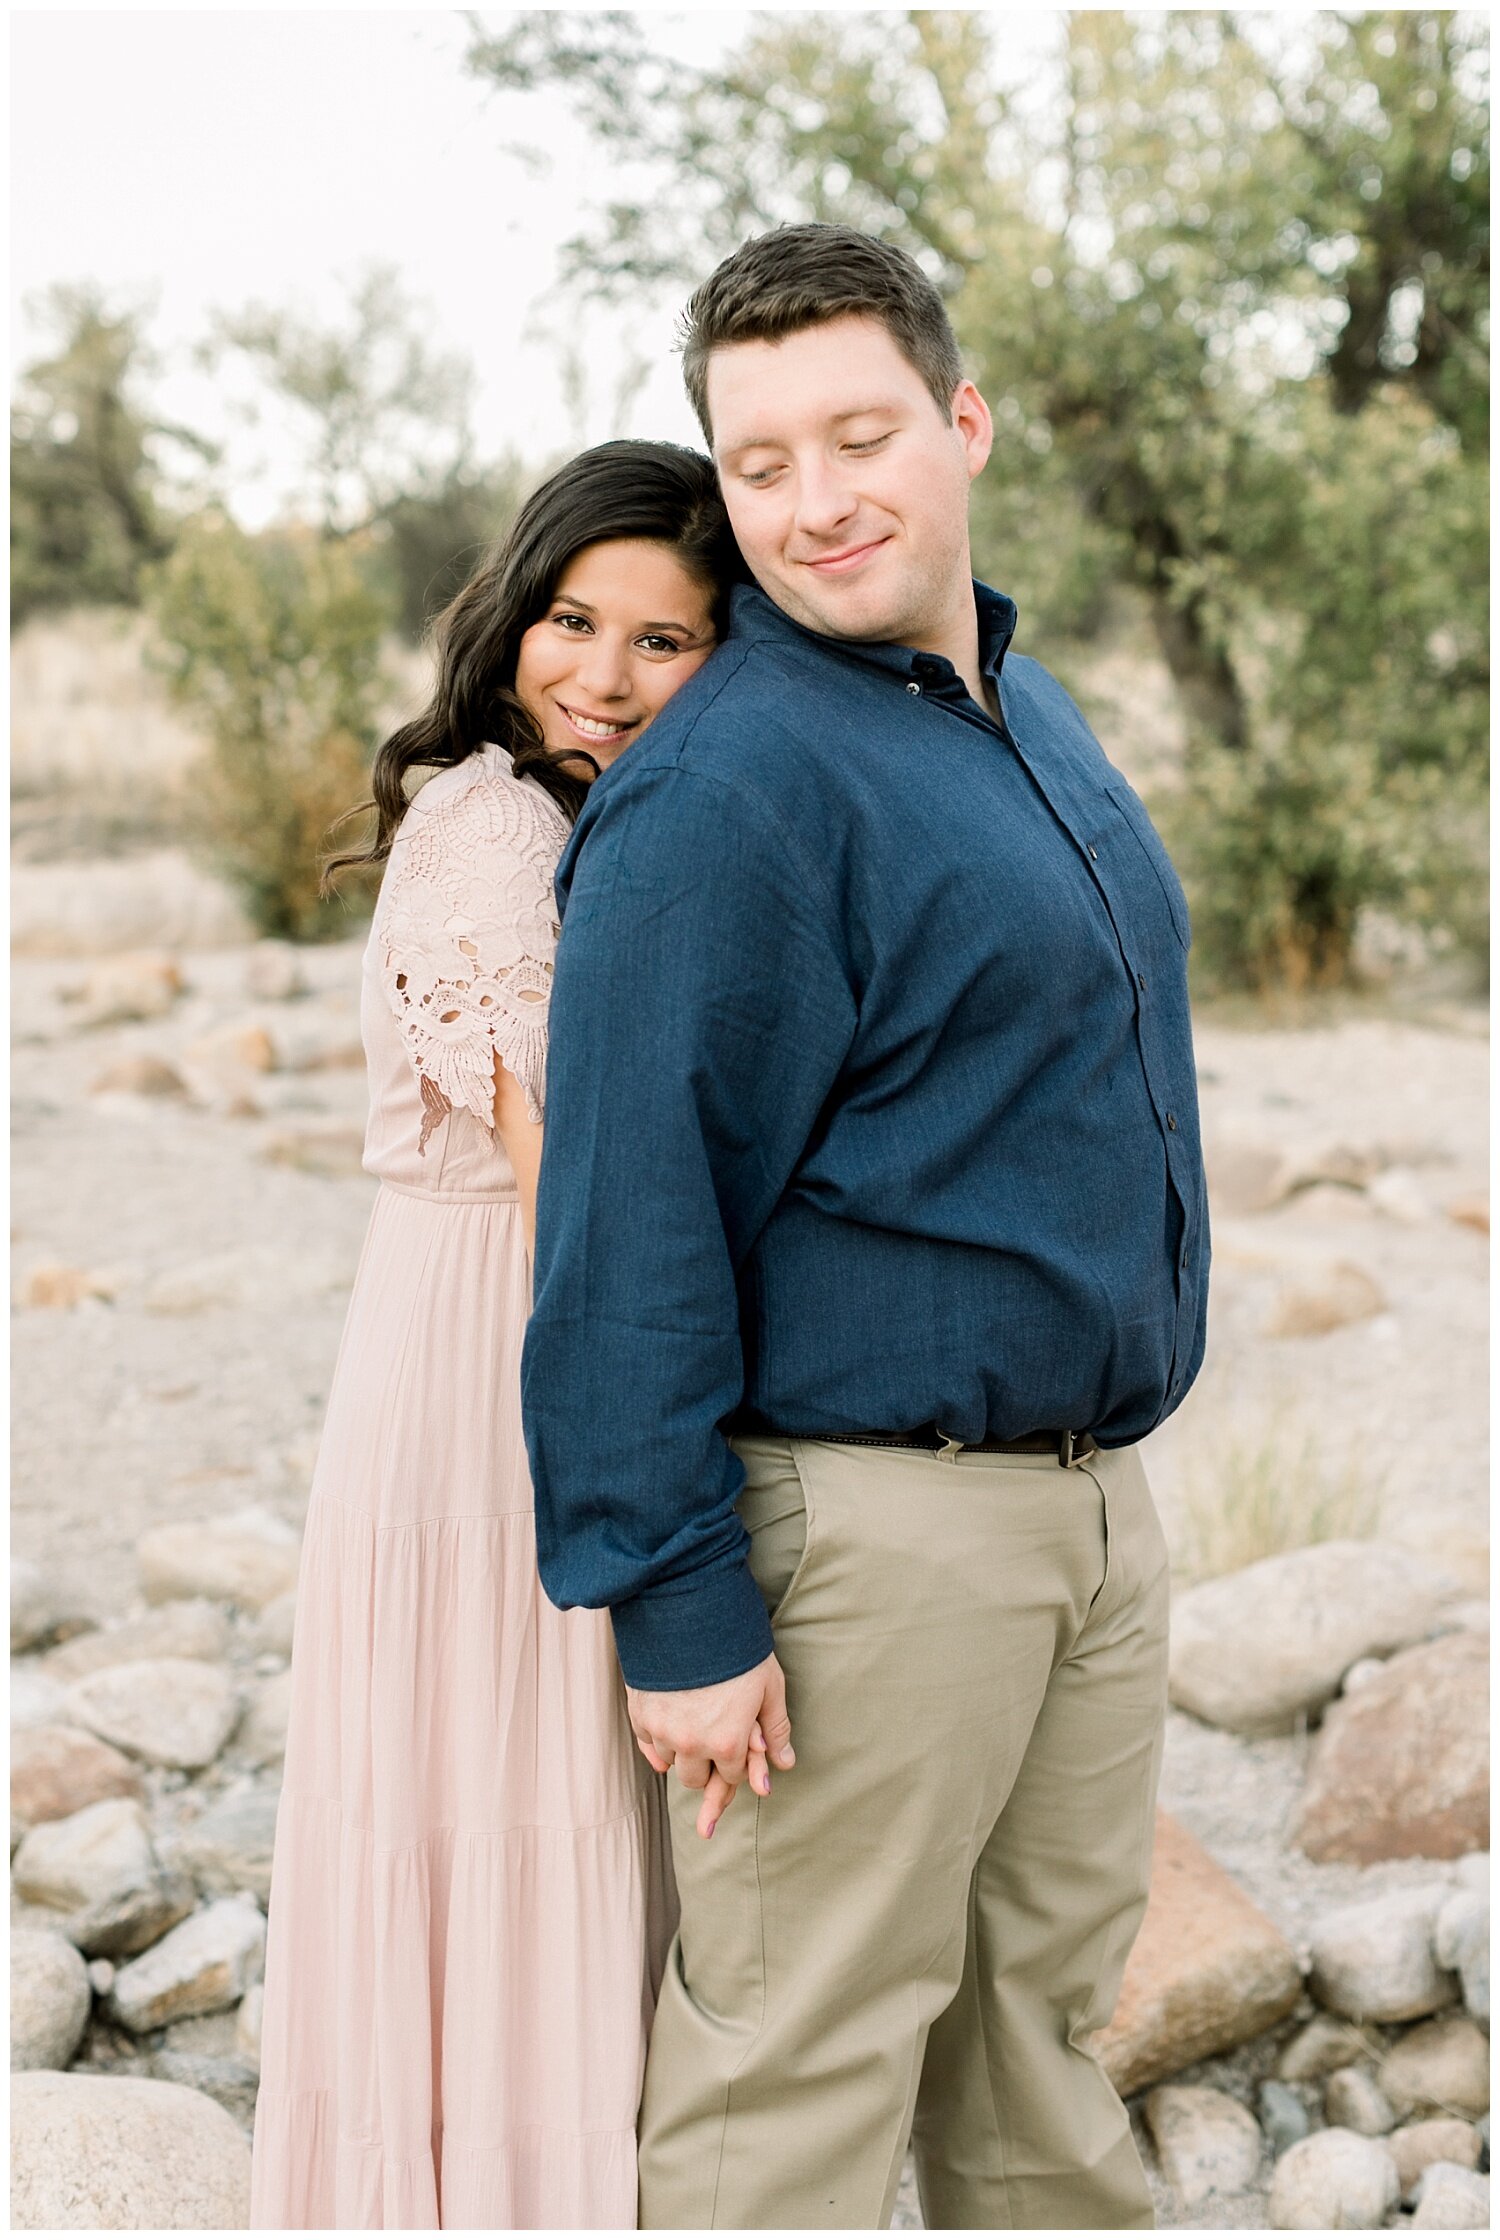 Couple wears a pink dress and blue button down shirt during their desert engagement session in Tucson, Arizona.